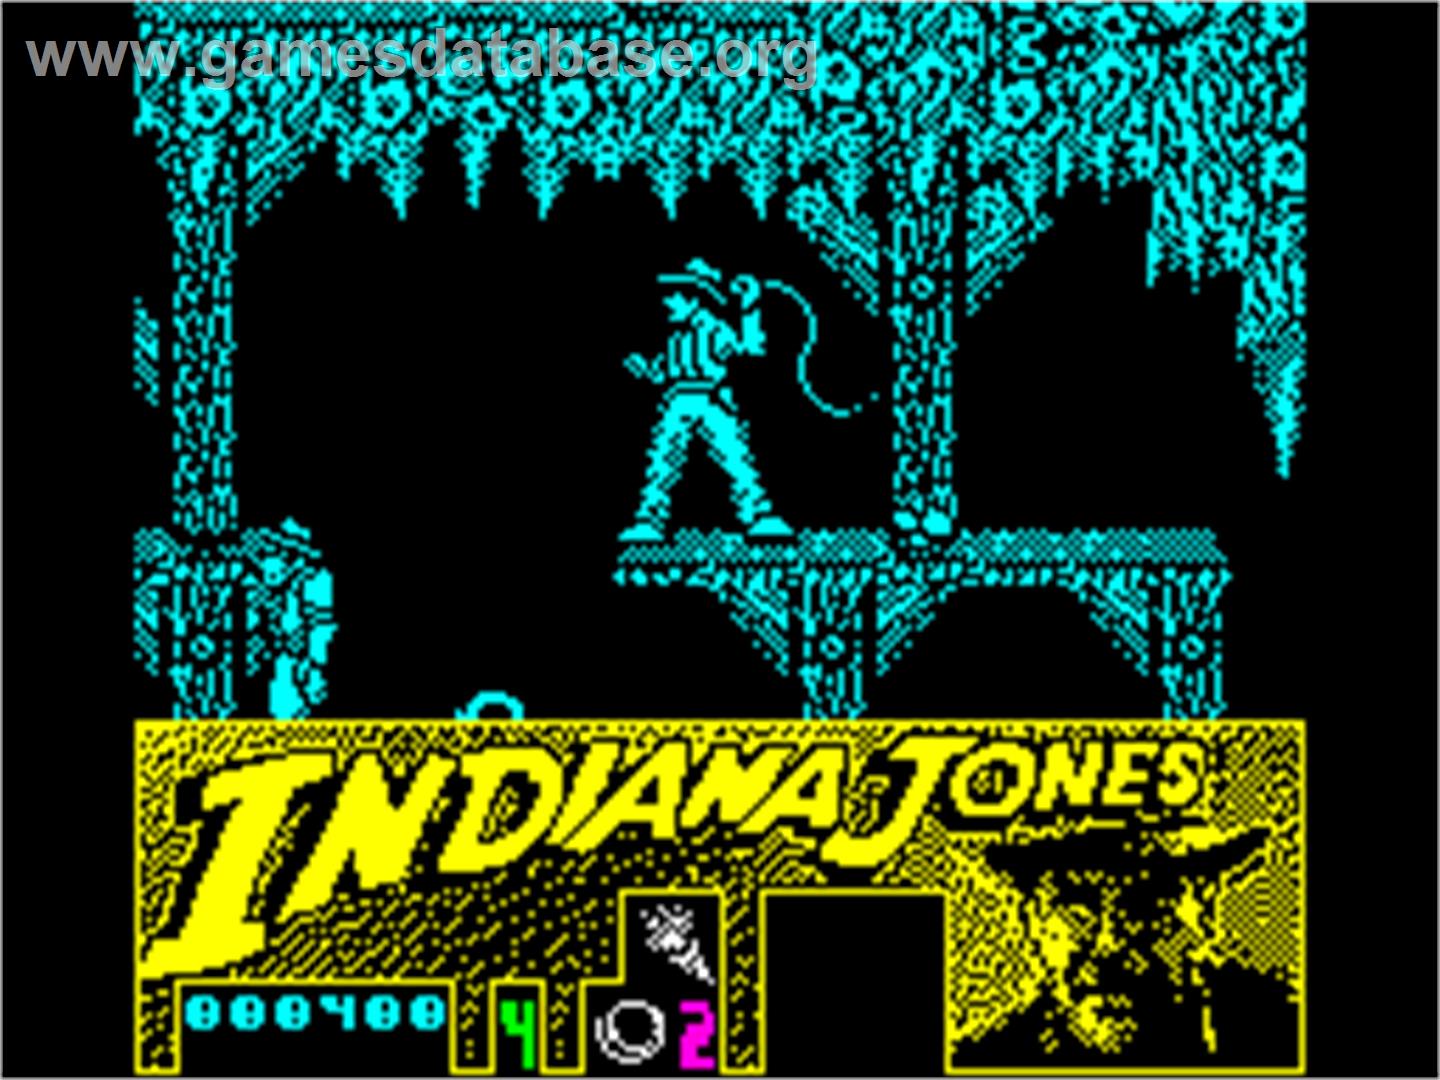 Indiana Jones and the Last Crusade: The Action Game - Sinclair ZX Spectrum - Artwork - In Game